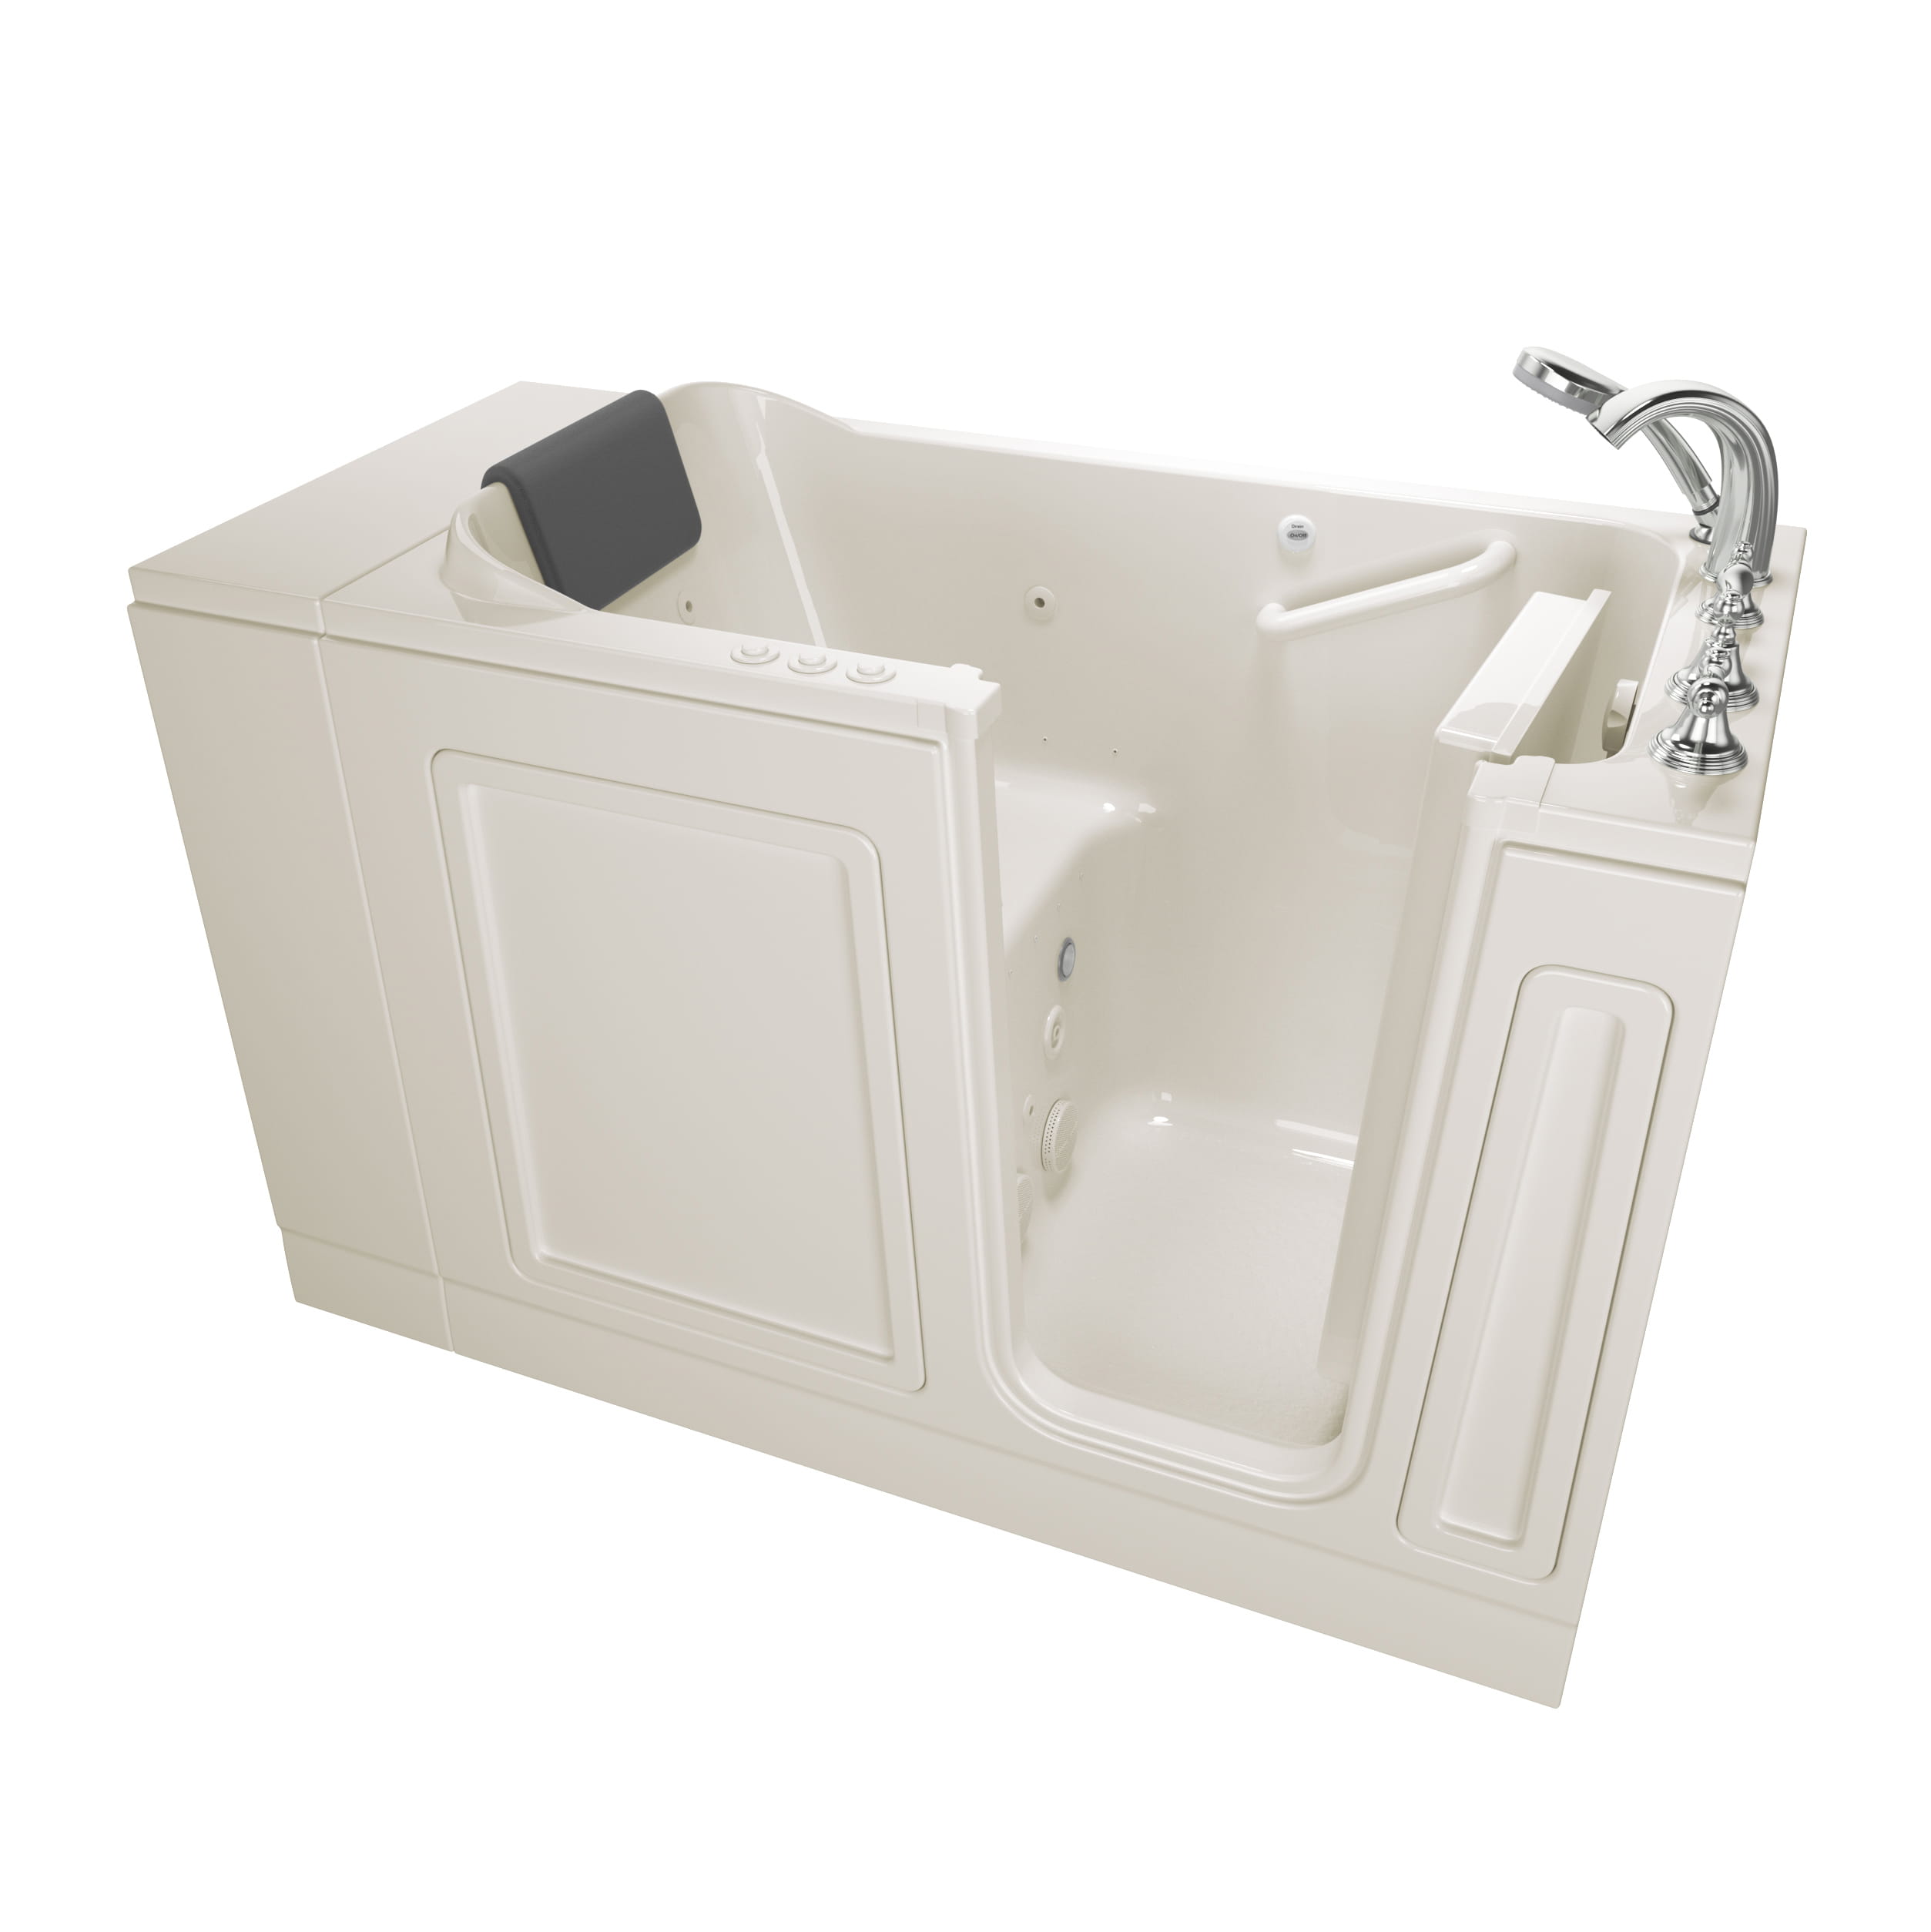 Acrylic Luxury Series 28 x 48 Inch Walk in Tub With Combination Air Spa and Whirlpool Systems   Right Hand Drain With Faucet WIB LINEN